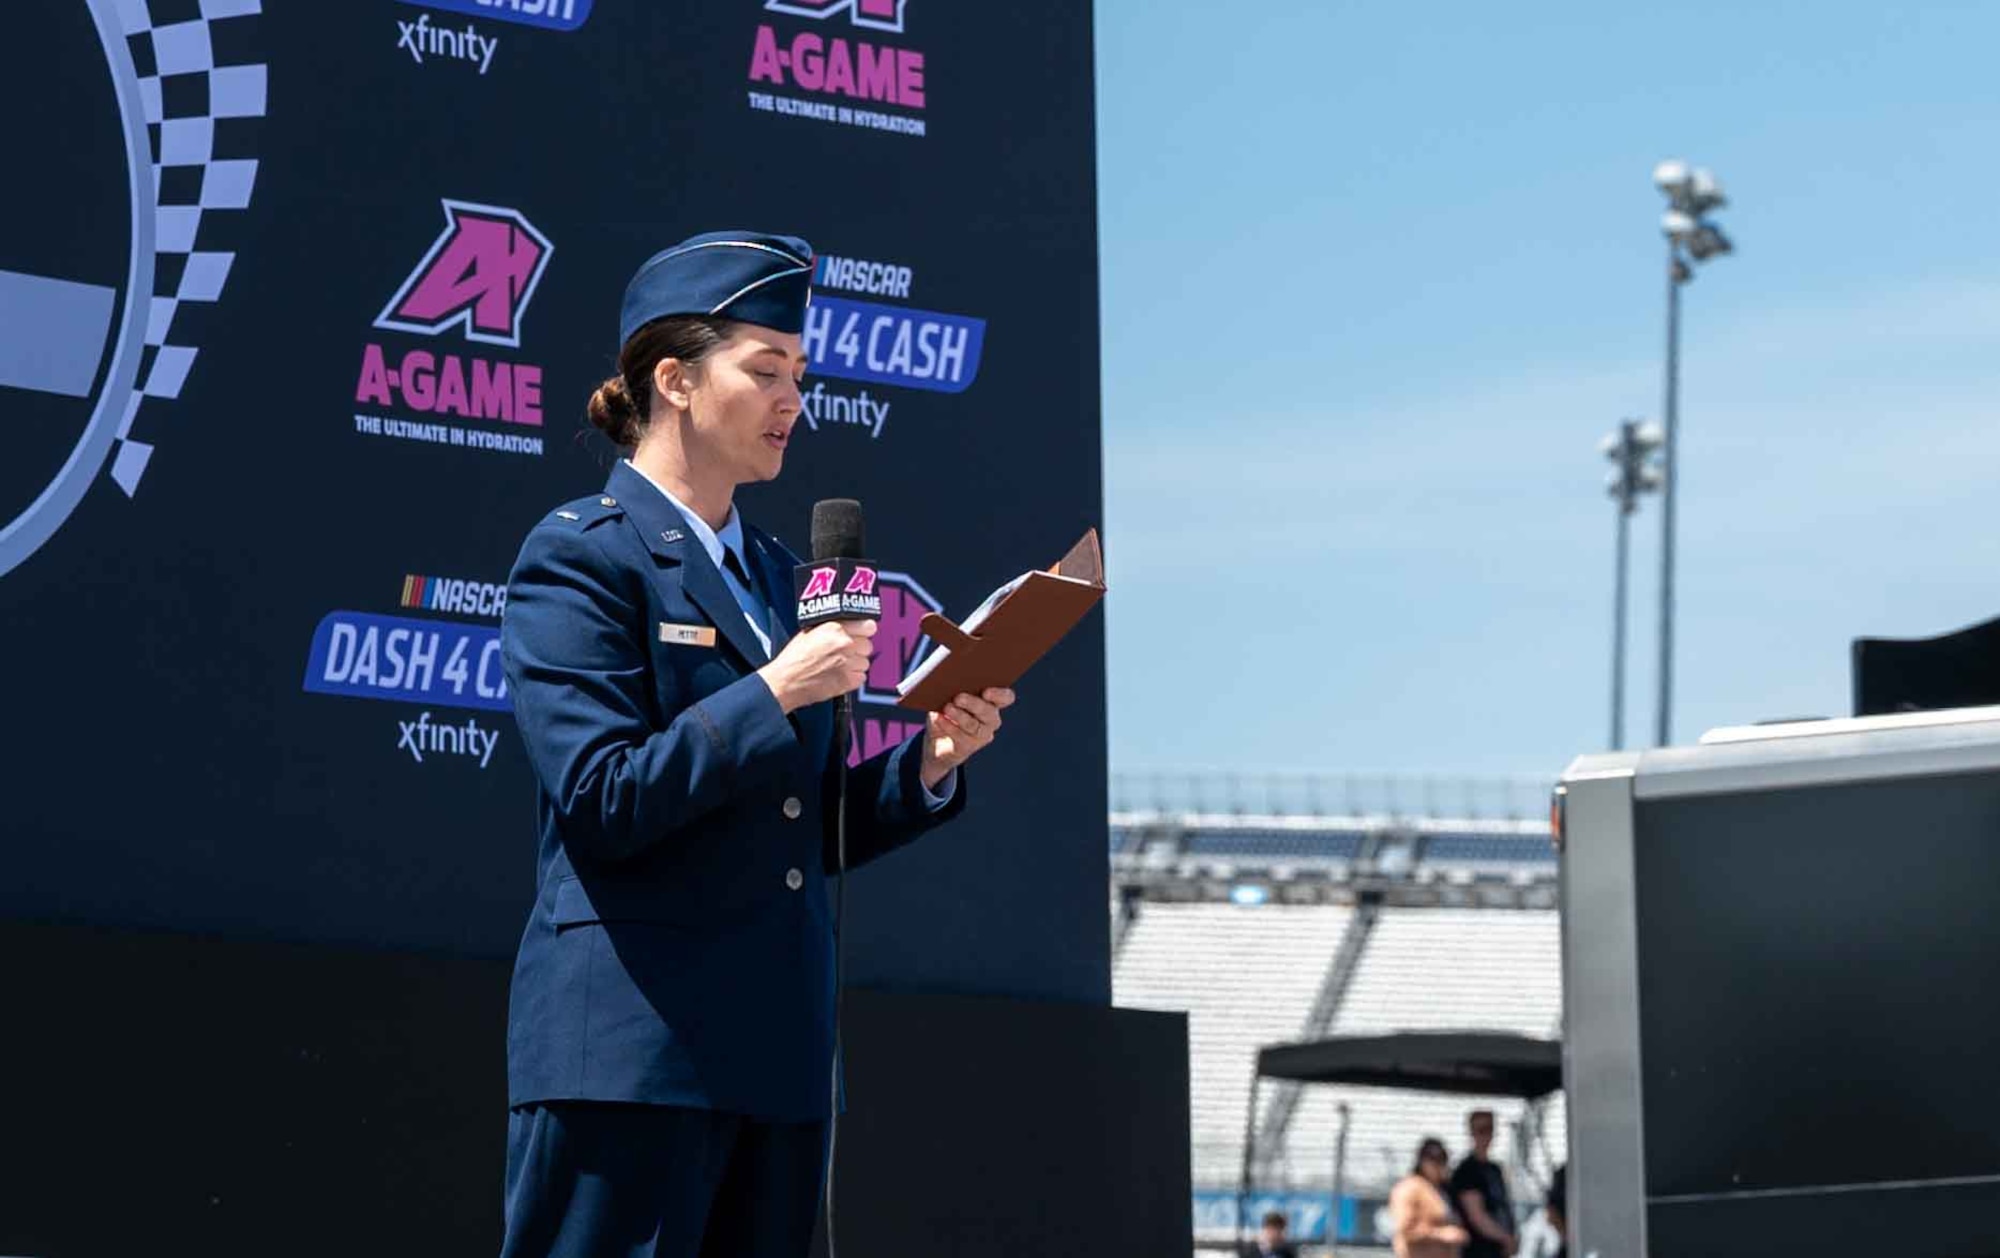 First Lt. Rebecca Petit, 436th Airlift Wing chaplain, gives the invocation before the A-Game 200 NASCAR race at Dover Motor Speedway in Dover, Delaware, April 30, 2022. Petit and the Dover Air Force Base Honor Guard performed during pre-race events throughout the 2022 NASCAR weekend. (U.S. Air Force photo by Senior Airman Faith Schaefer)